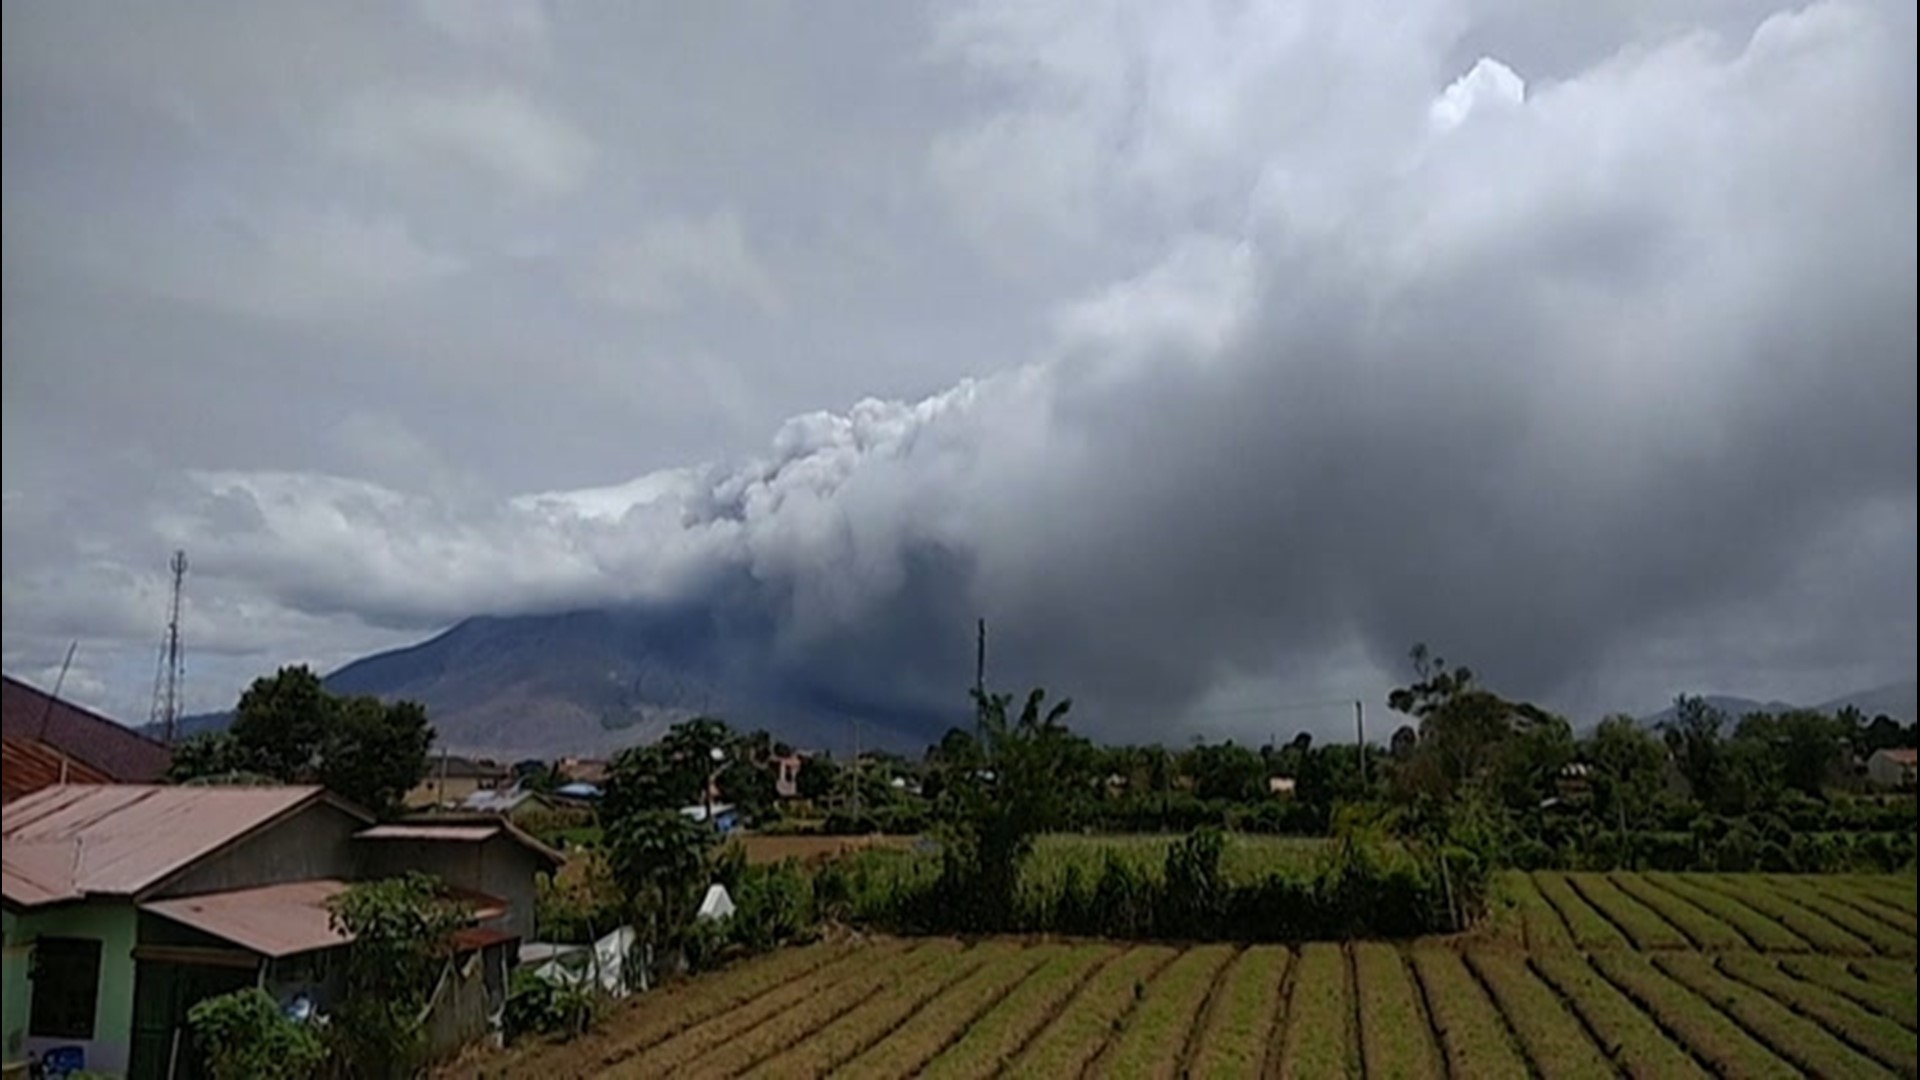 Ash and debris raced into the sky as Indonesia's Mt. Sinabung volcano erupted on Aug. 10. The ash is said to have towered nearly 3 miles into the air.